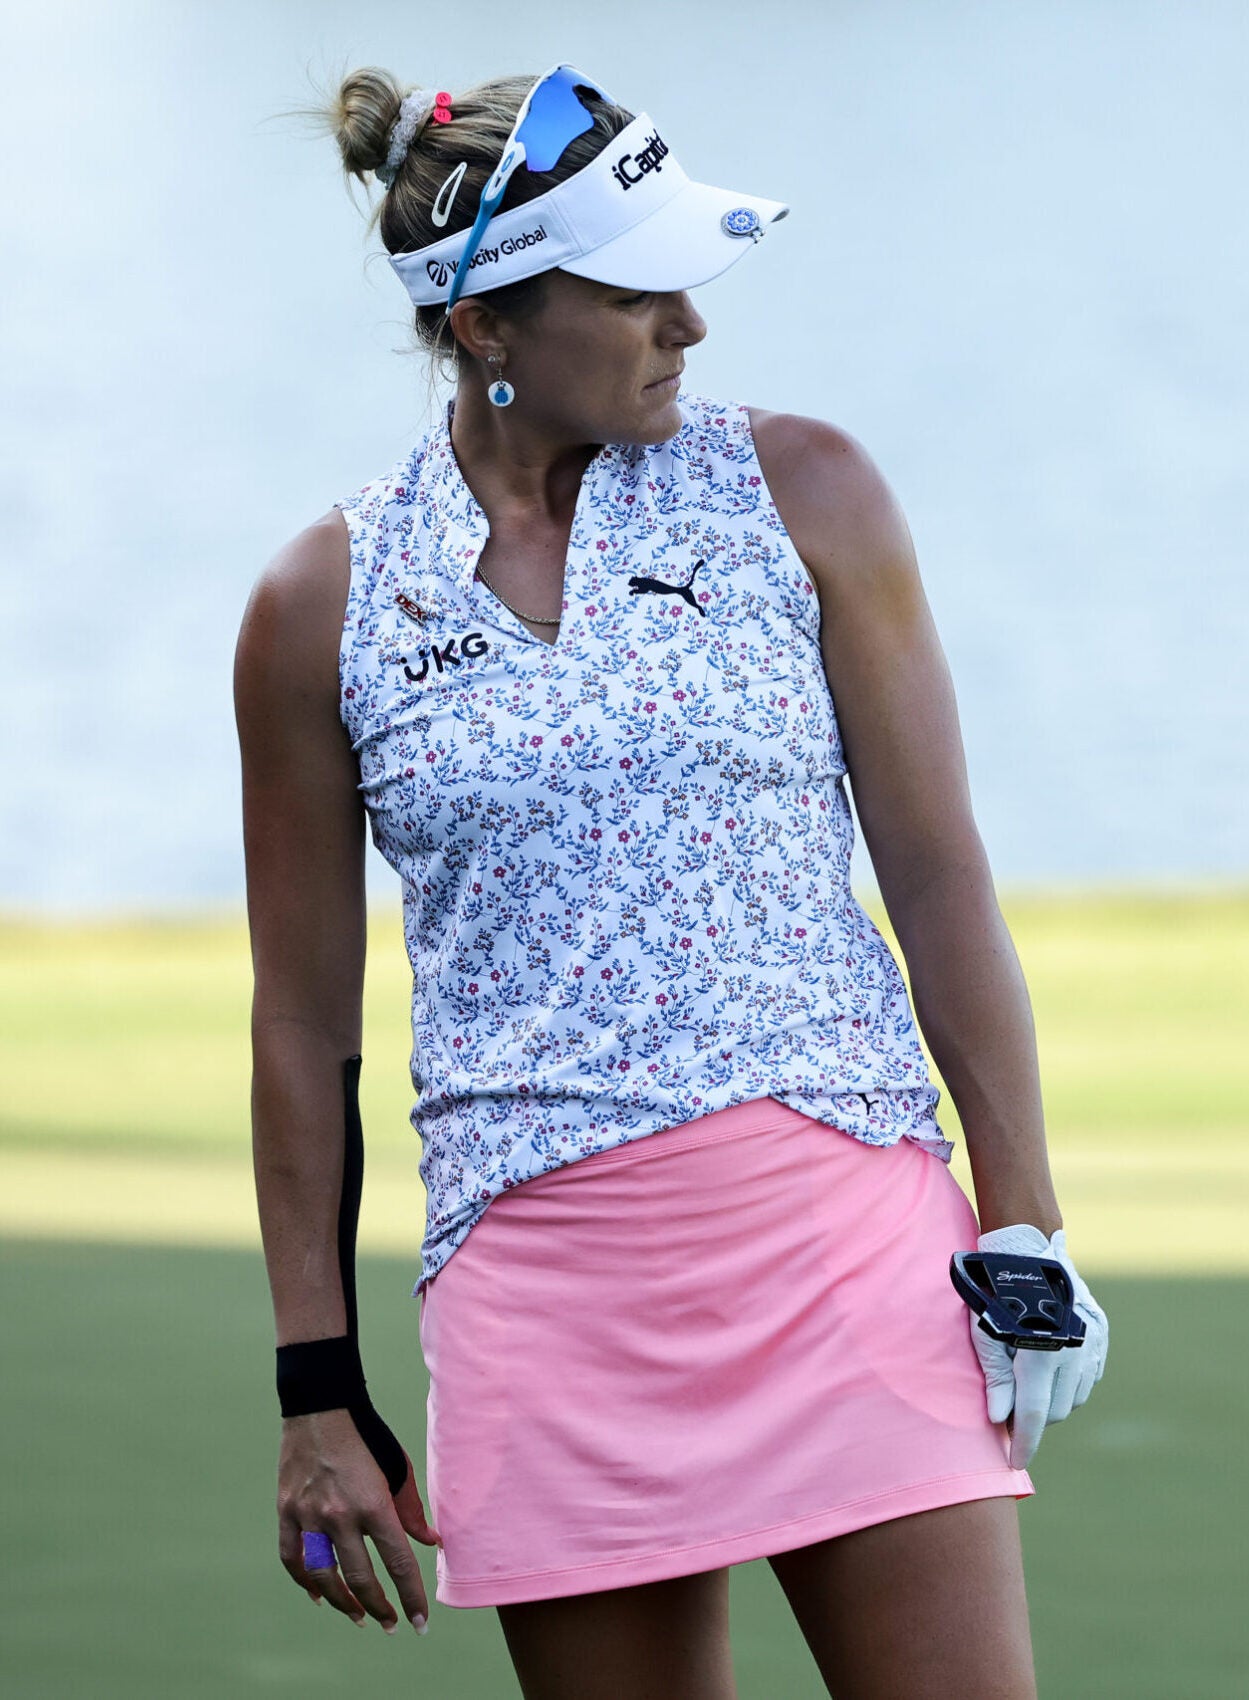 THE WOODLANDS, TEXAS - APRIL 21: Lexi Thompson of the United States stands on the ninth green during the second round of The Chevron Championship at The Club at Carlton Woods on April 21, 2023 in The Woodlands, Texas. (Photo by Stacy Revere/Getty Images)